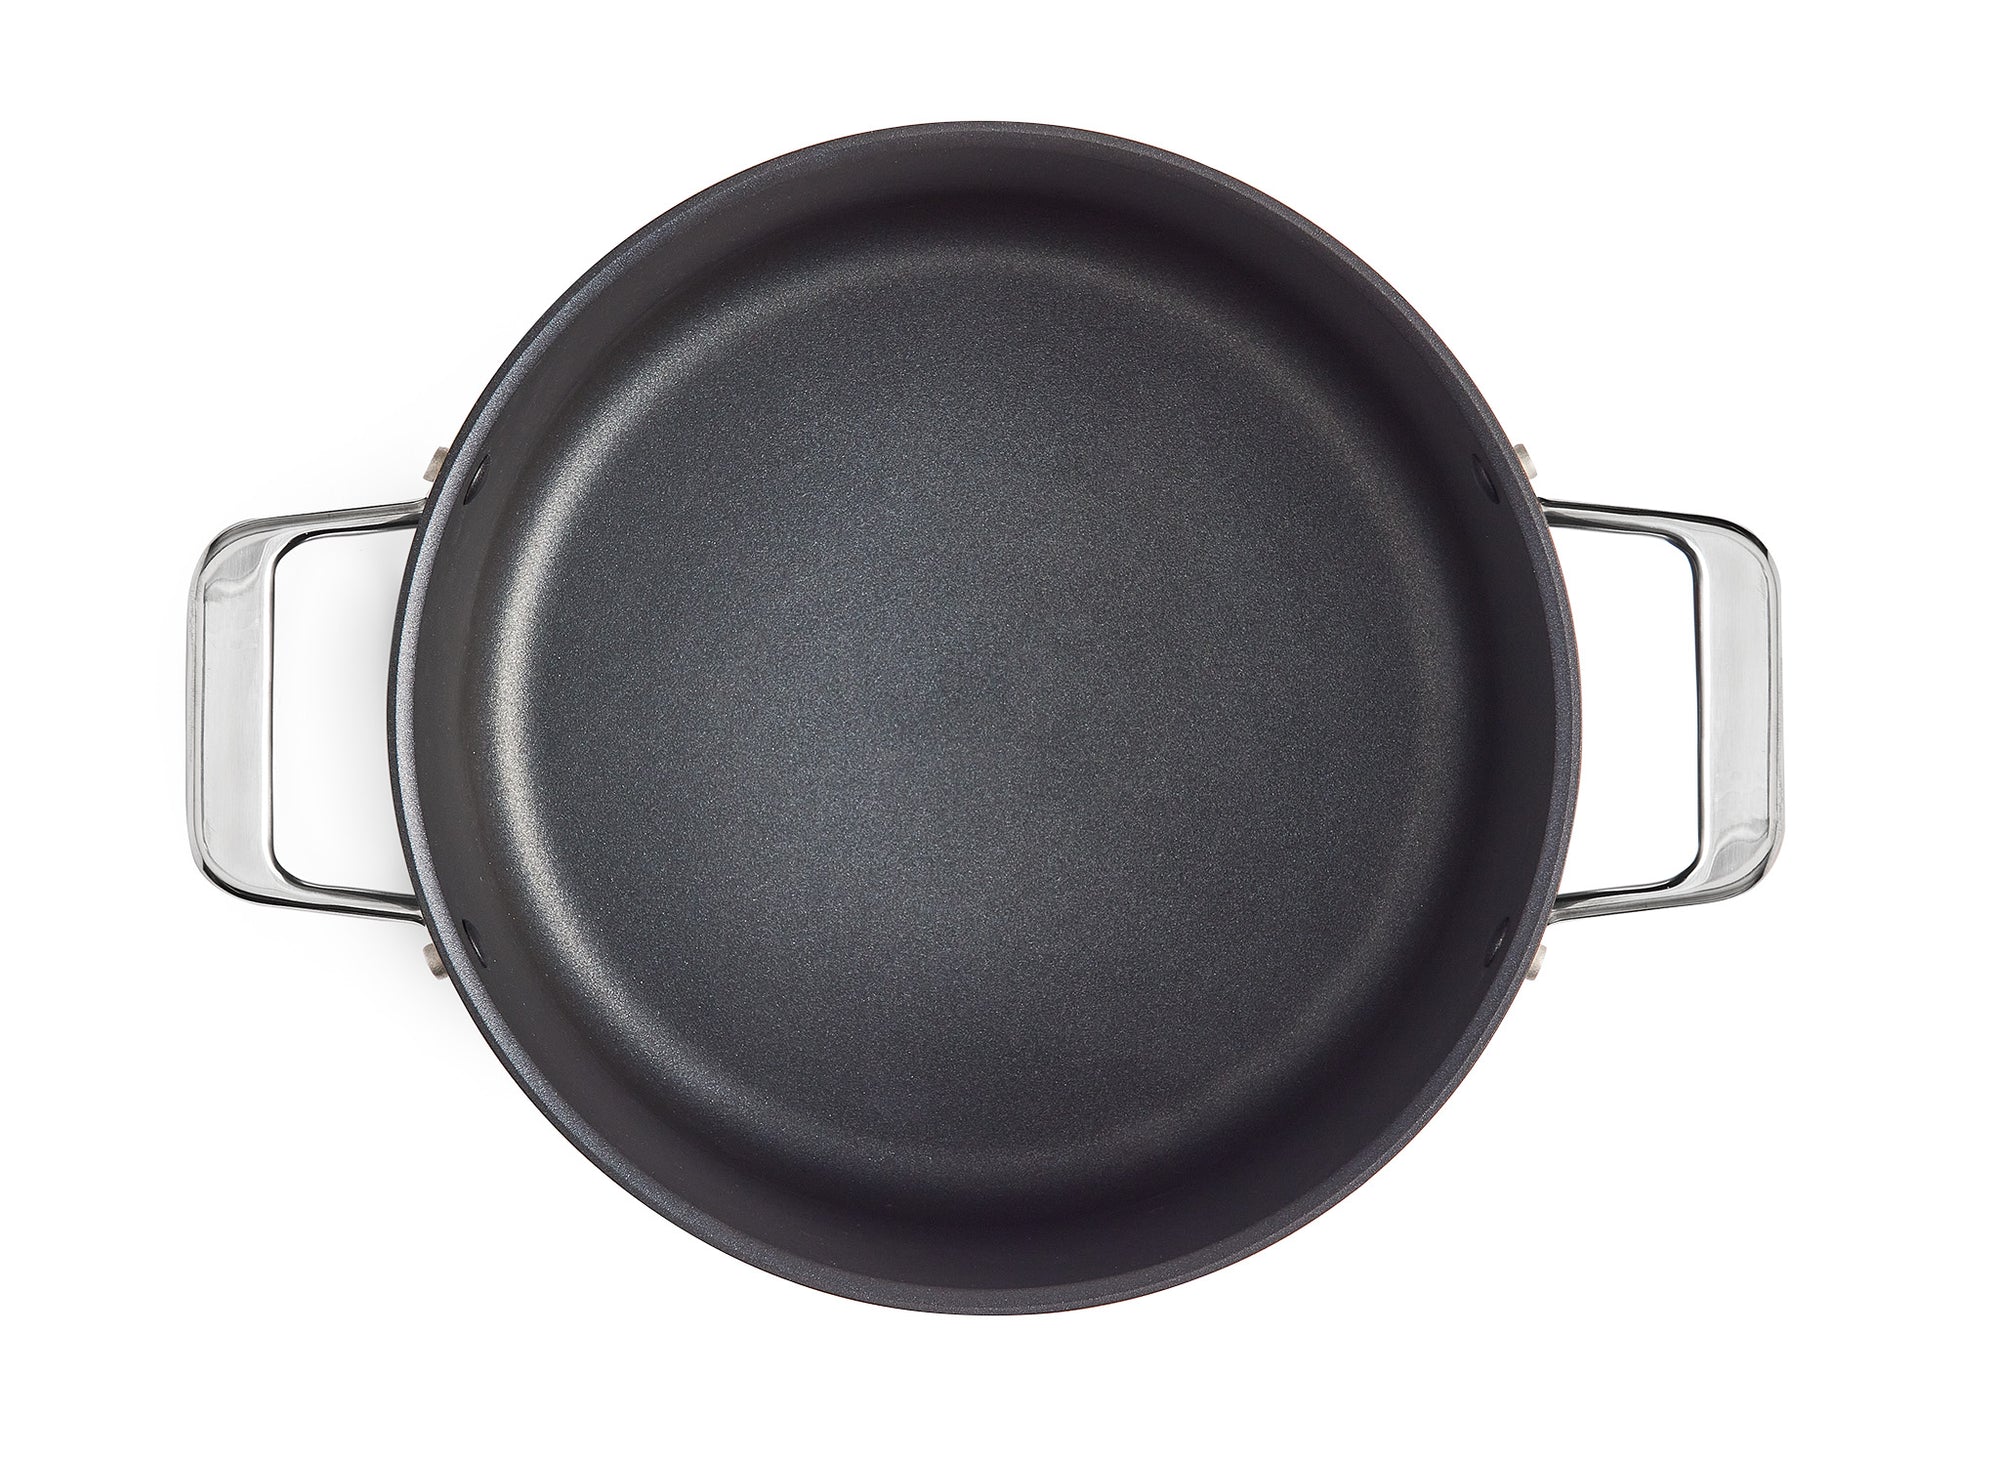 A bird’s eye view of the Misen 8 QT Nonstick Stockpot, with lid removed, on a white background.